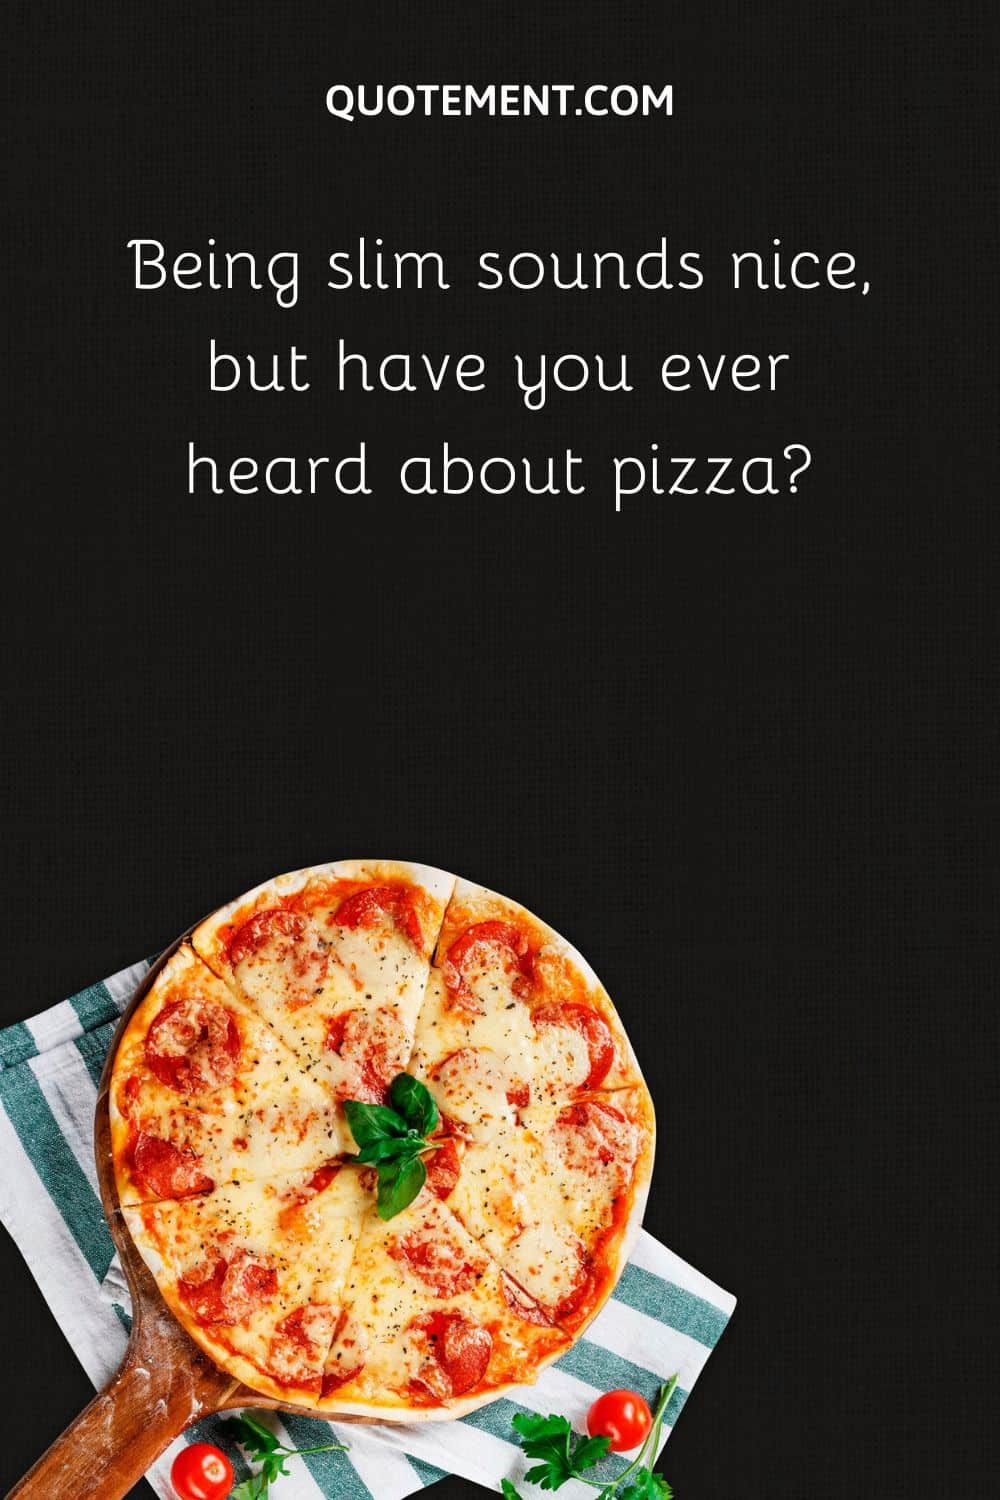 Being slim sounds nice, but have you ever heard about pizza